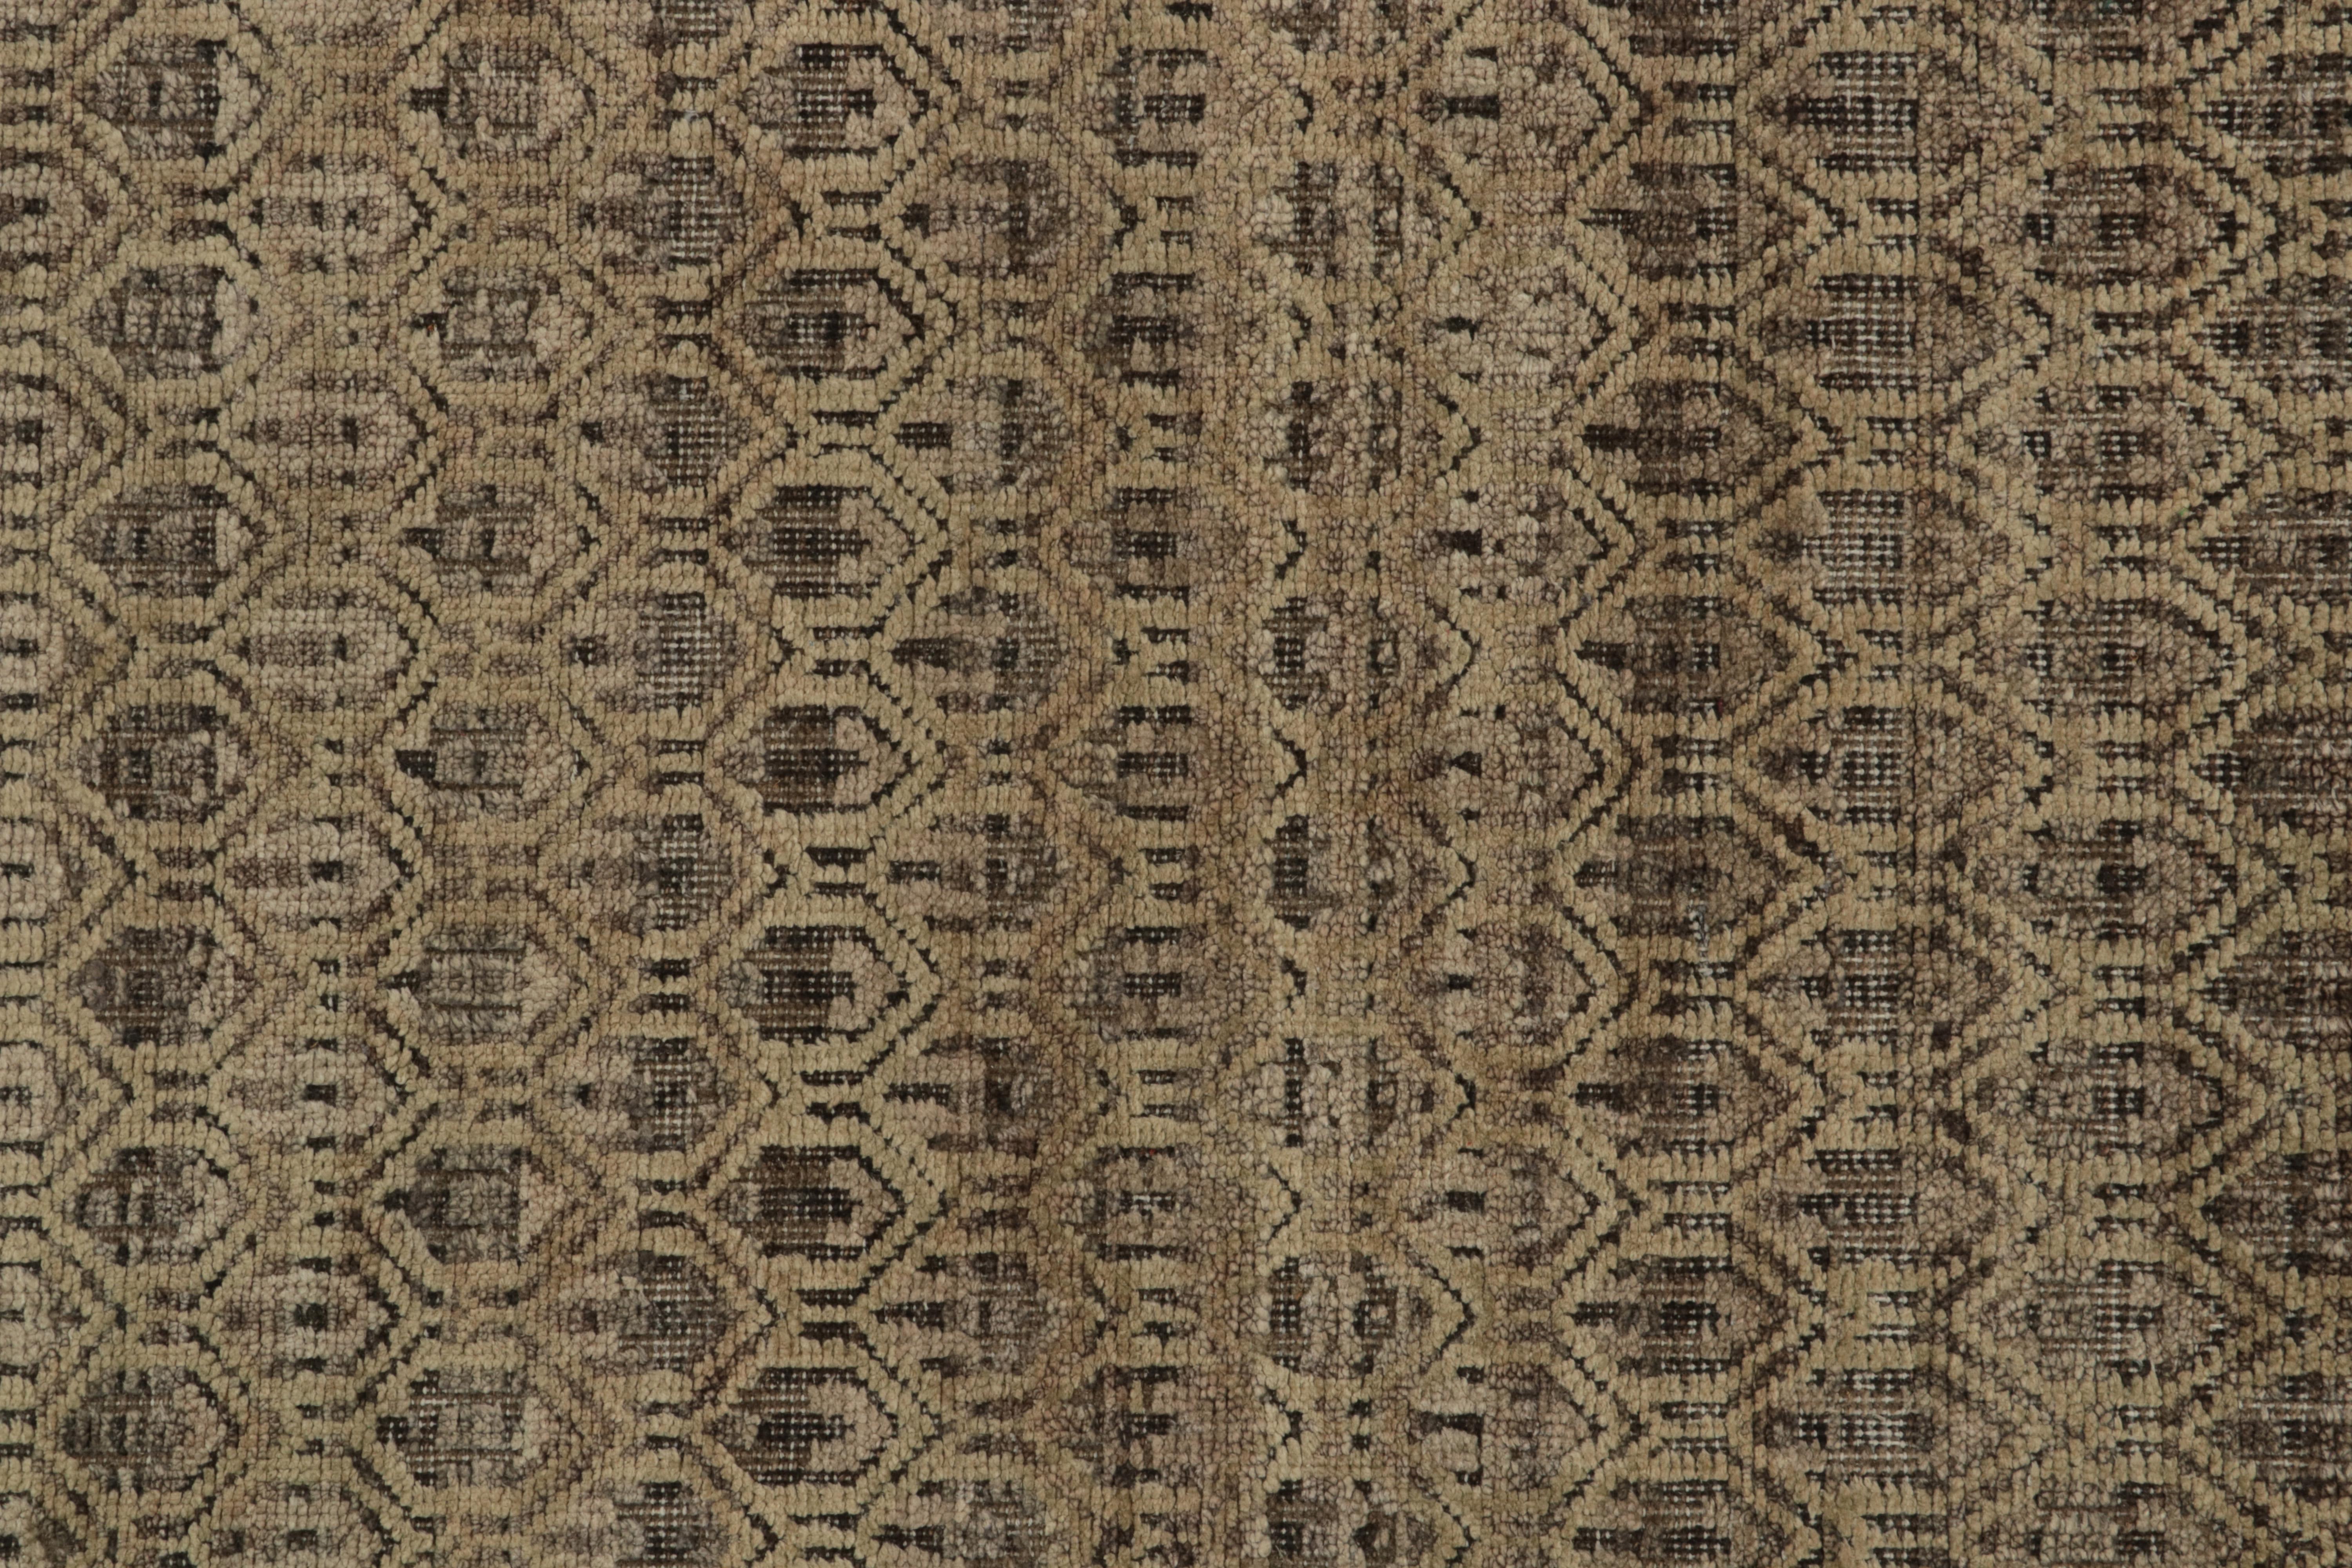 Contemporary Rug & Kilim’s Modern Textural Runner in Beige-Brown High-Low Geometric Patterns For Sale